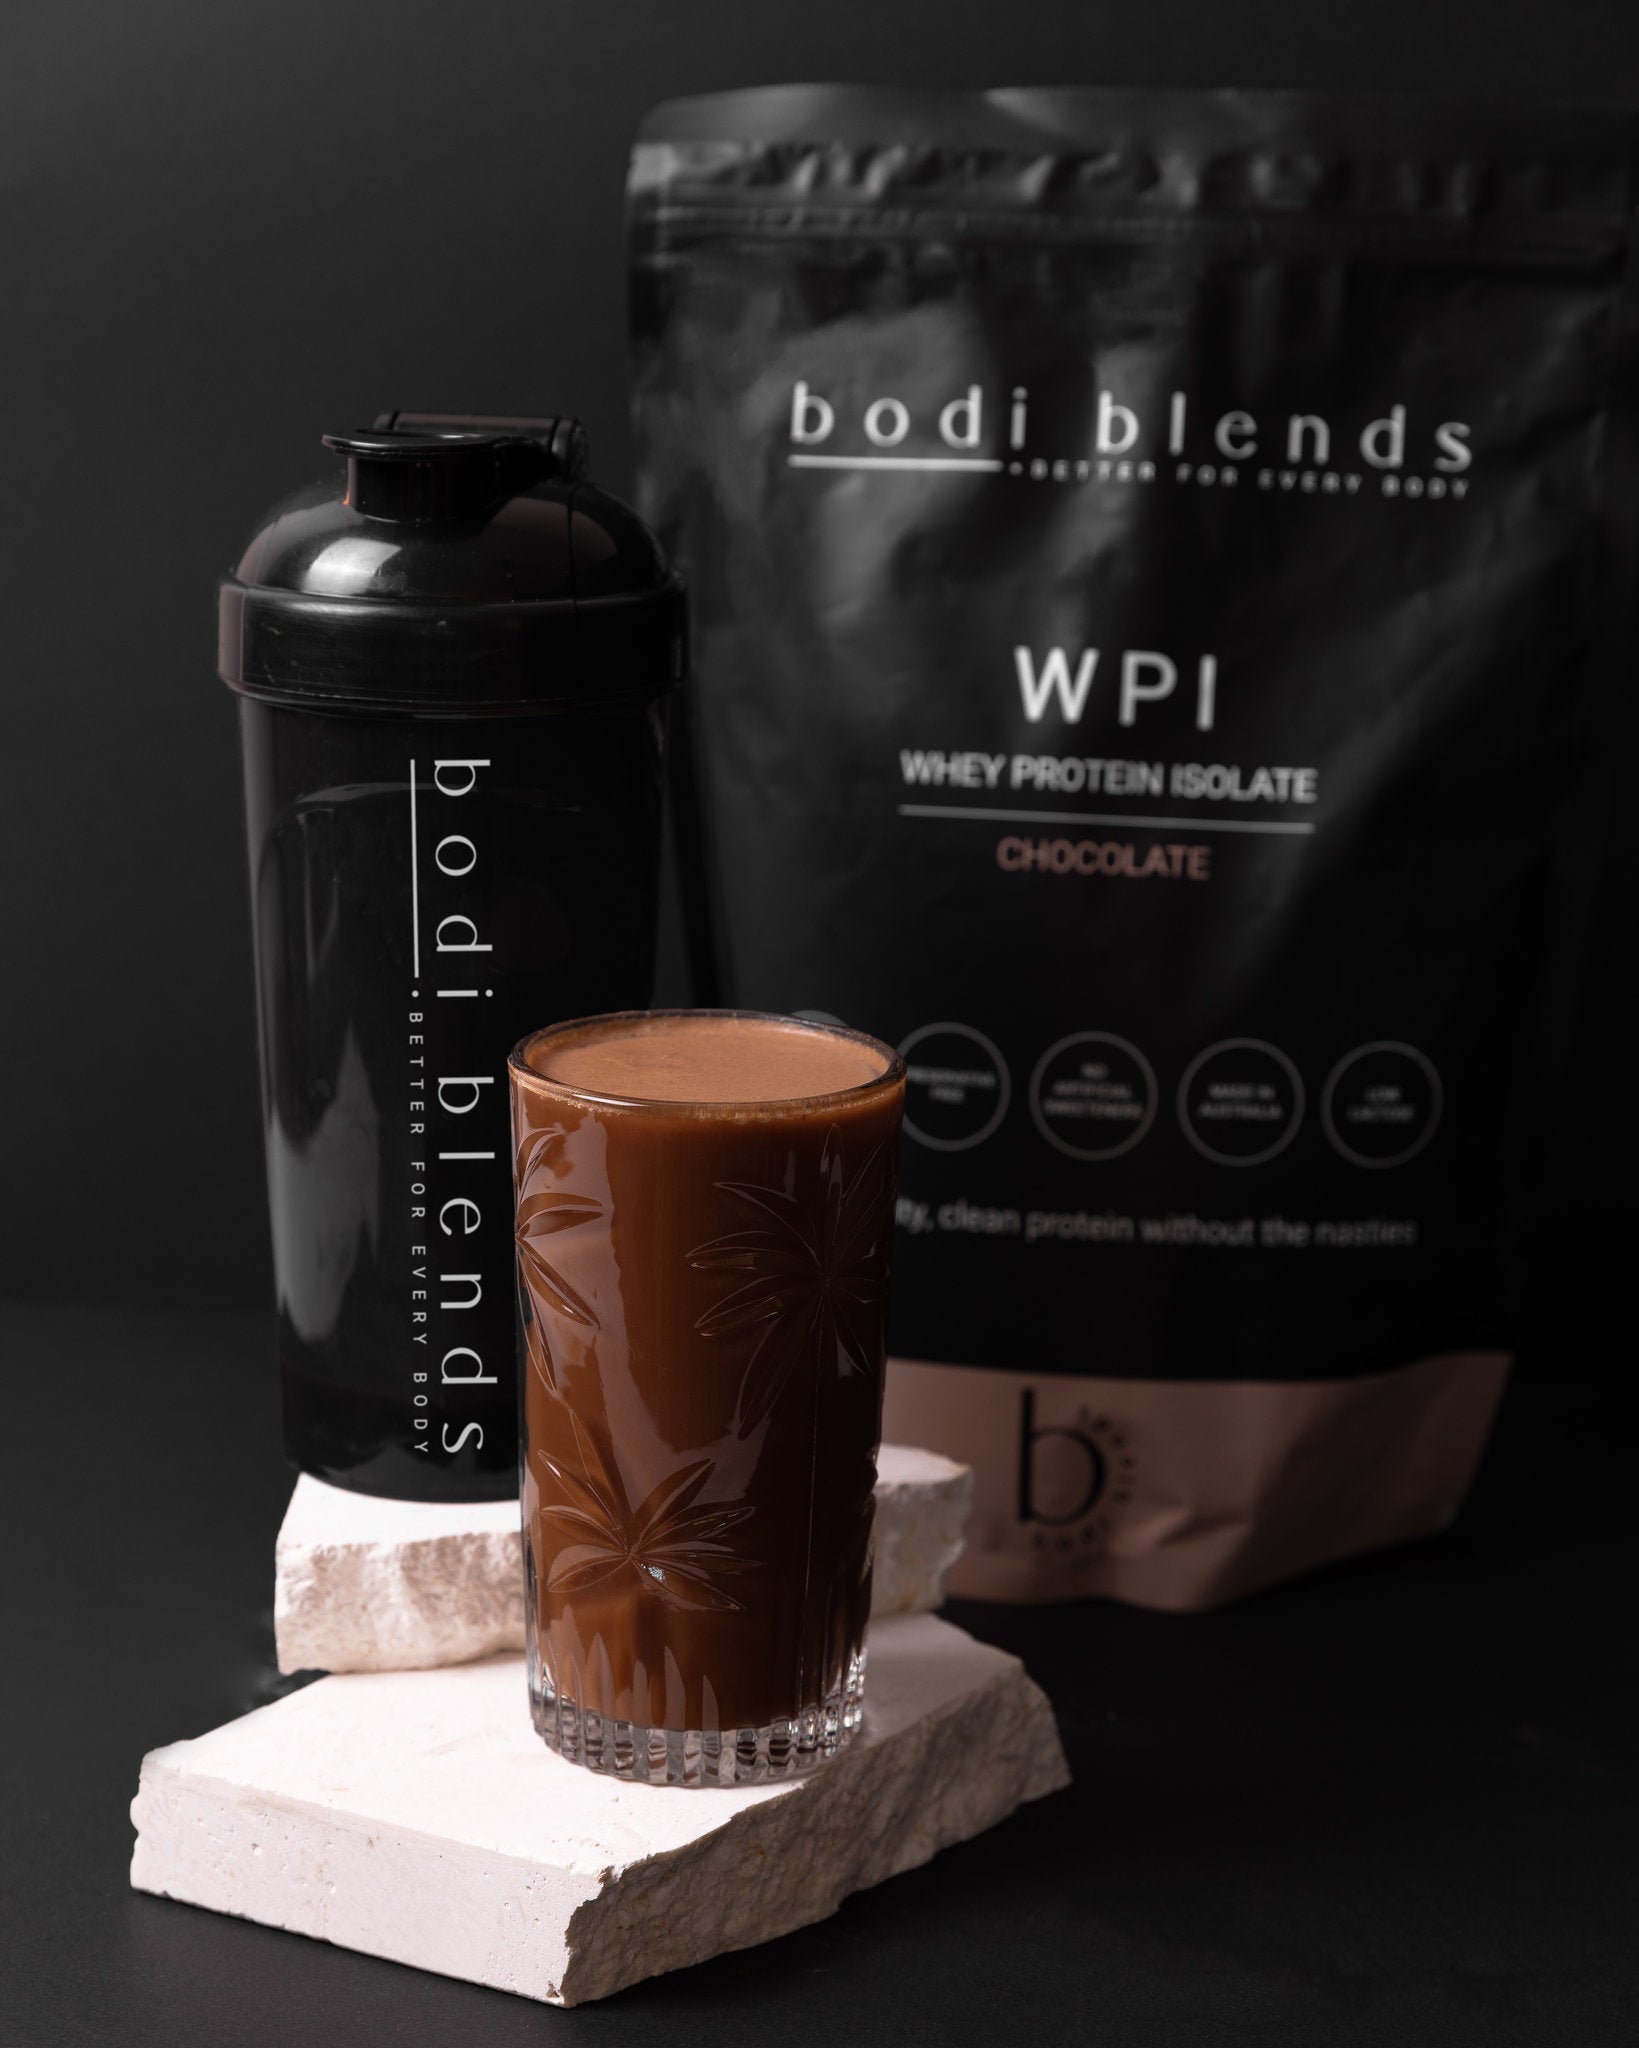 A glass sitting on a piece of rock with brown liquid inside. A black protein shaker sitting on a rock behind the glass with a white Bodi Blends logo down the side. A black and brown stand up pouch behind the shaker and glass with brand logo and nutritional information on it.